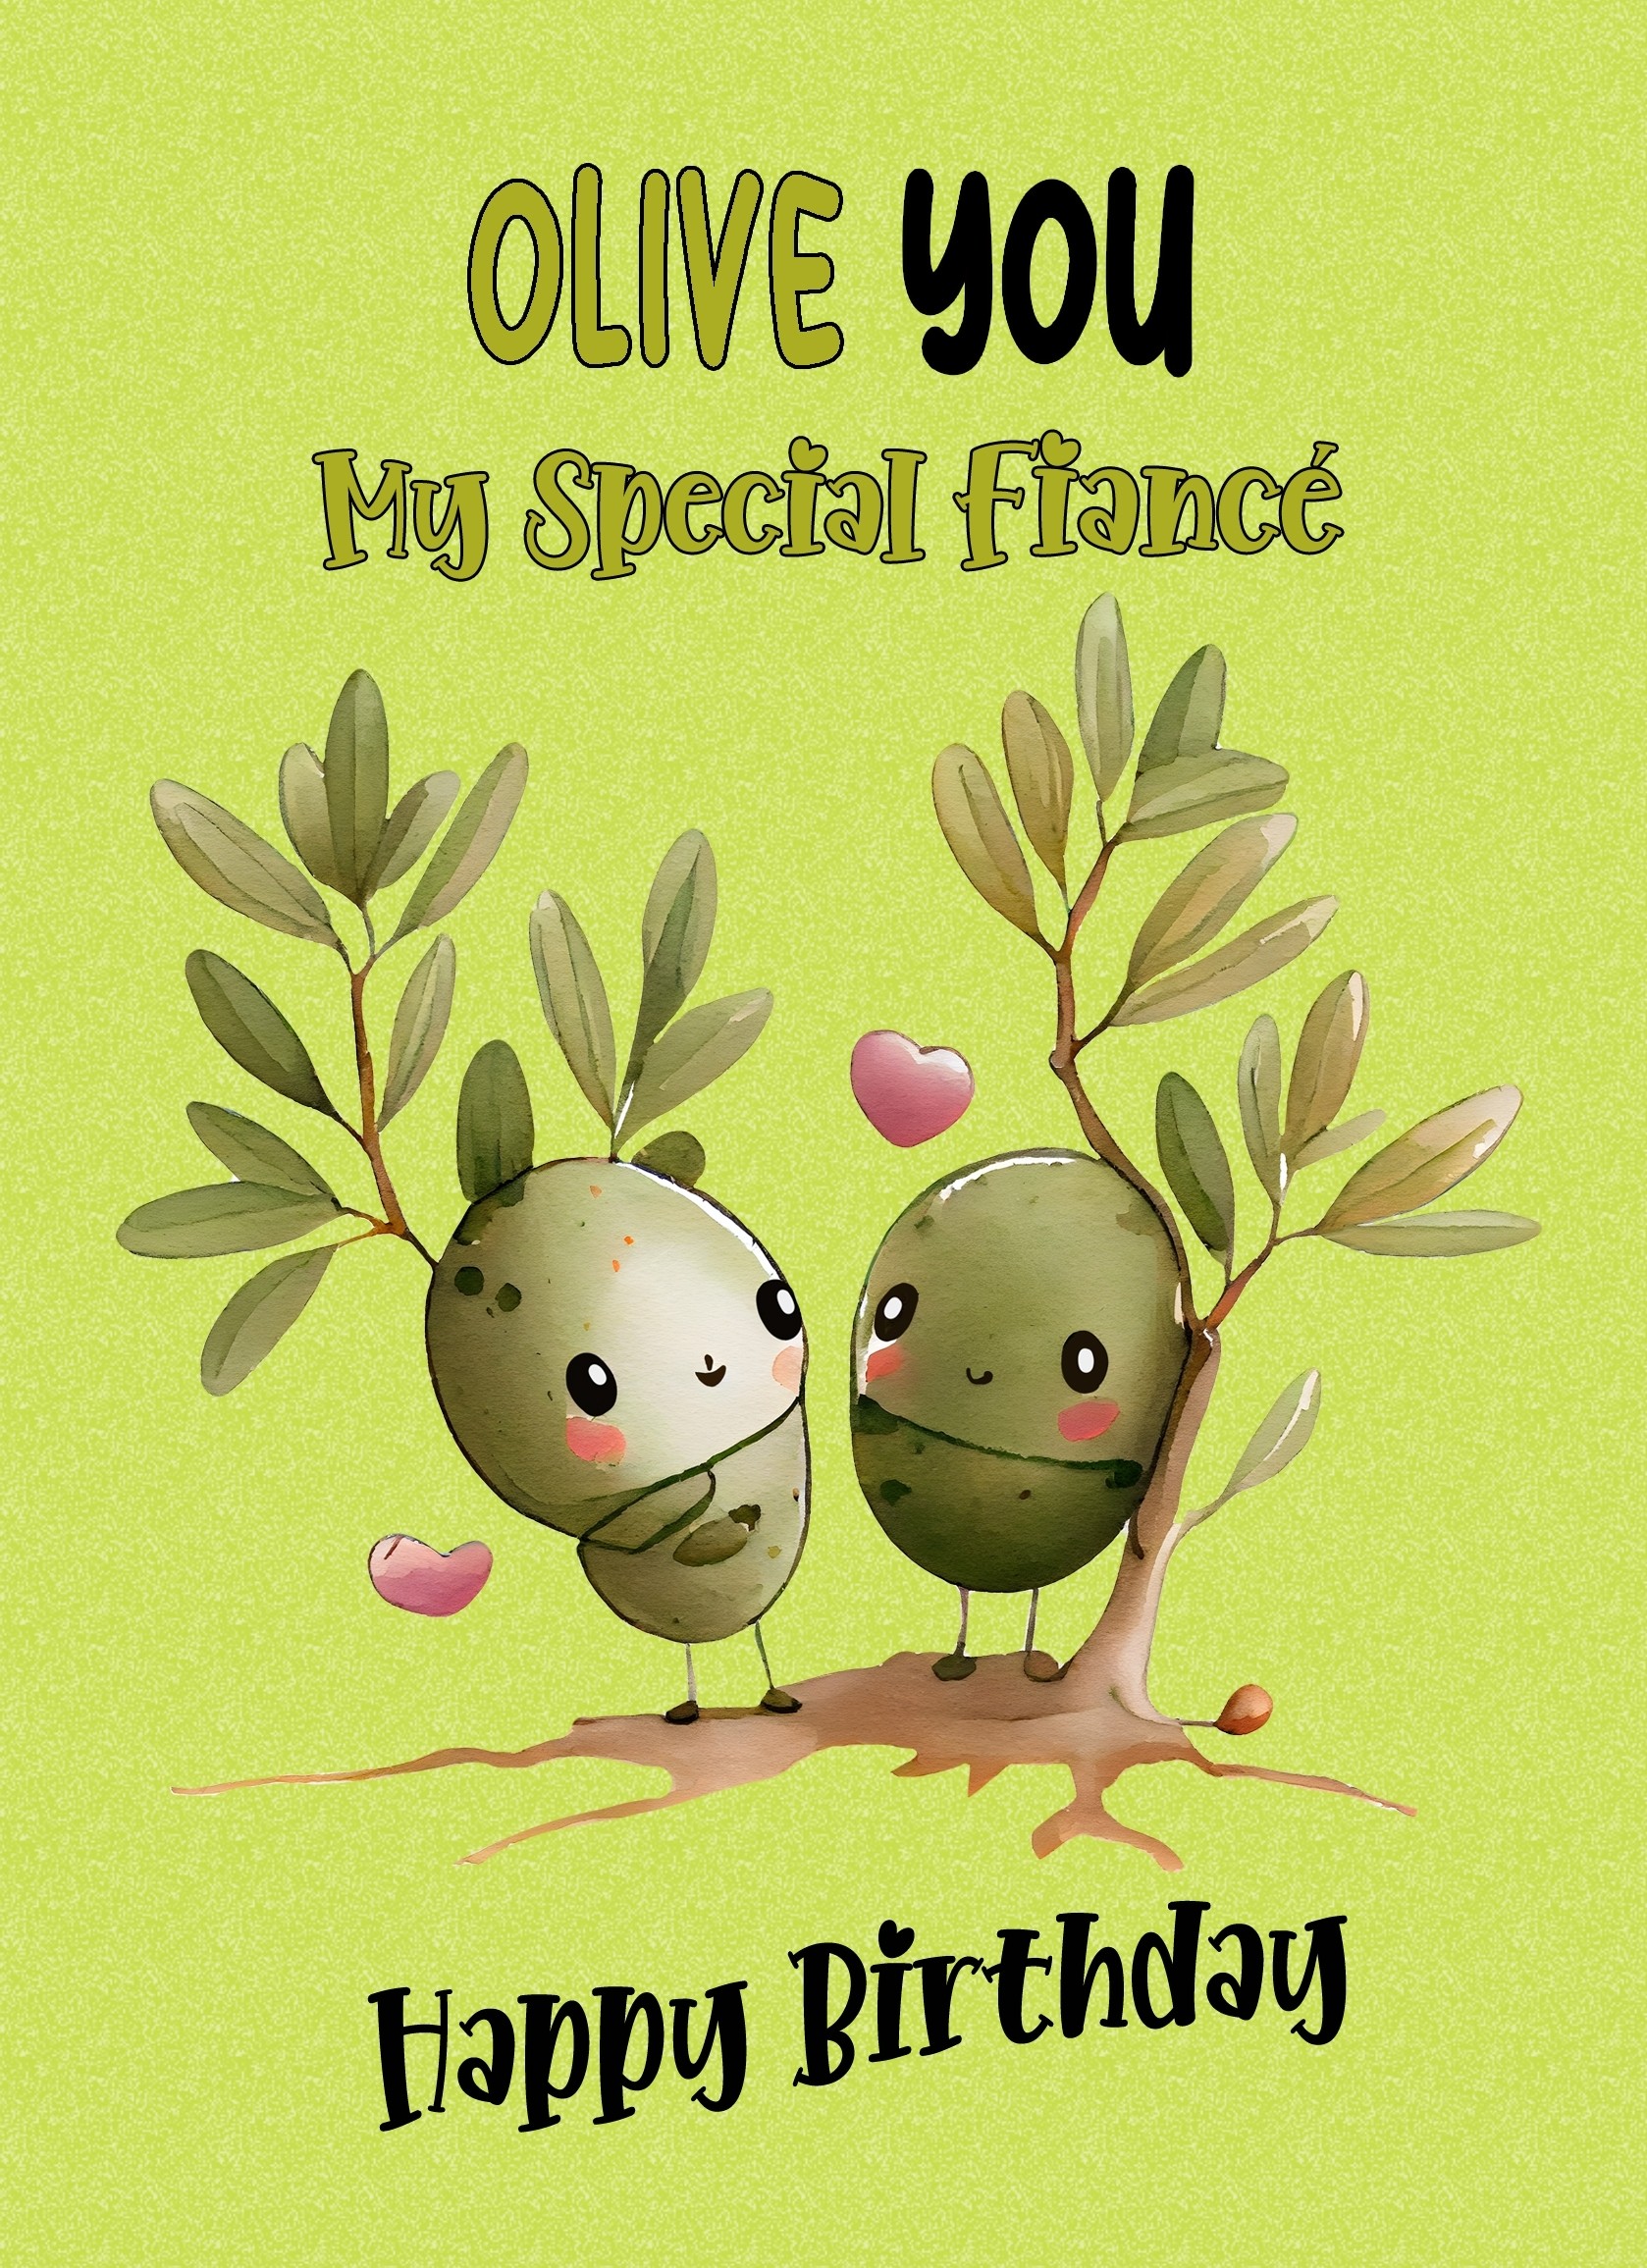 Funny Pun Romantic Birthday Card for Fiance (Olive You)